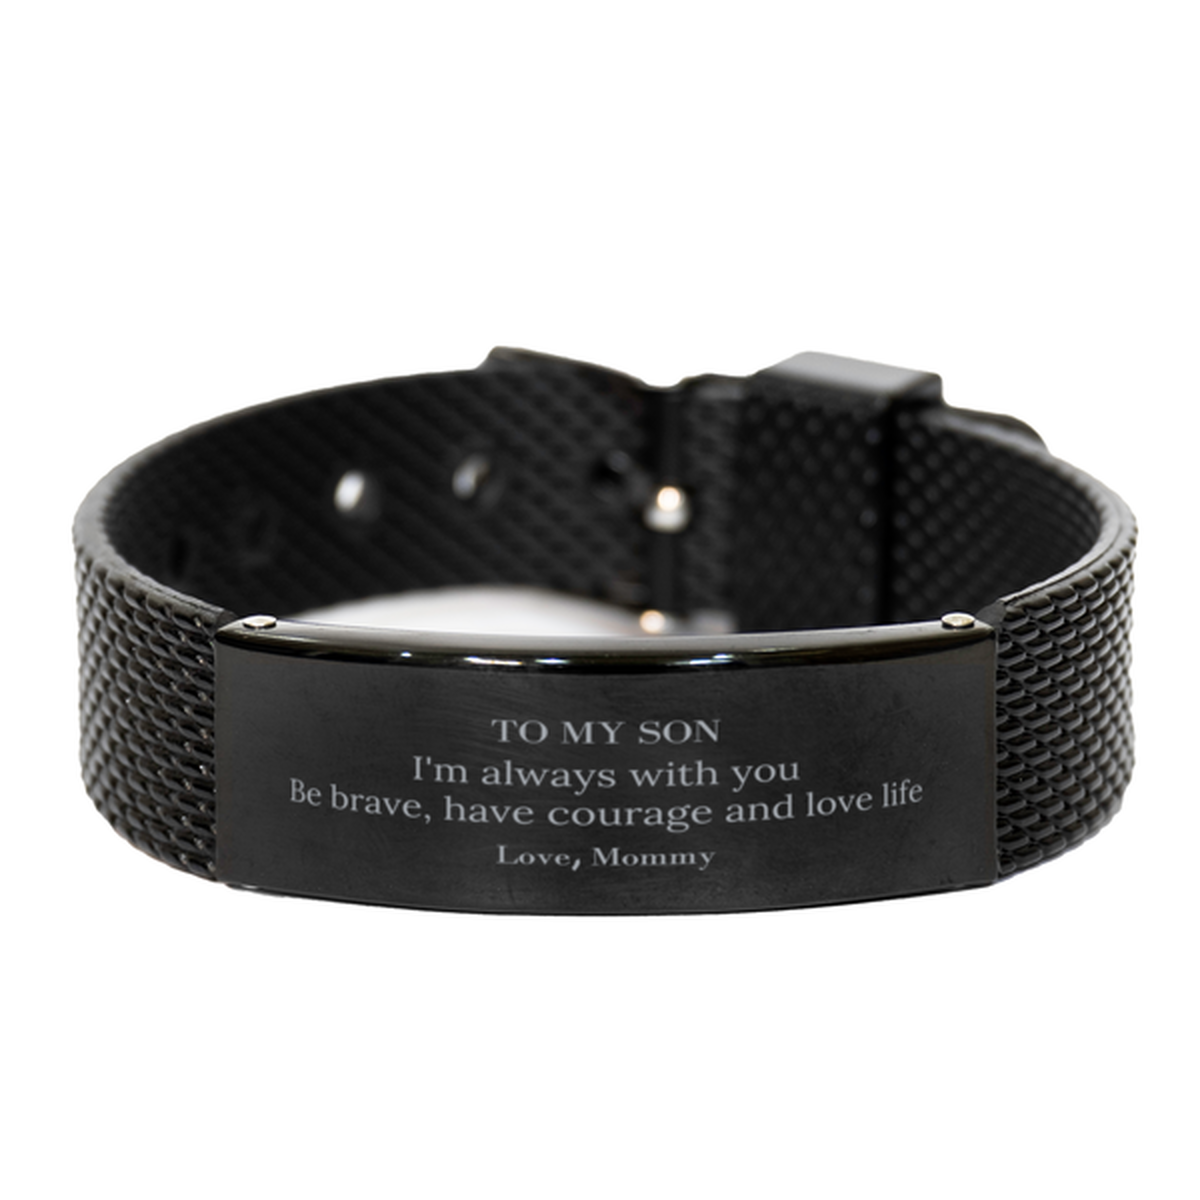 To My Son Gifts from Mommy, Unique Black Shark Mesh Bracelet Inspirational Christmas Birthday Graduation Gifts for Son I'm always with you. Be brave, have courage and love life. Love, Mommy